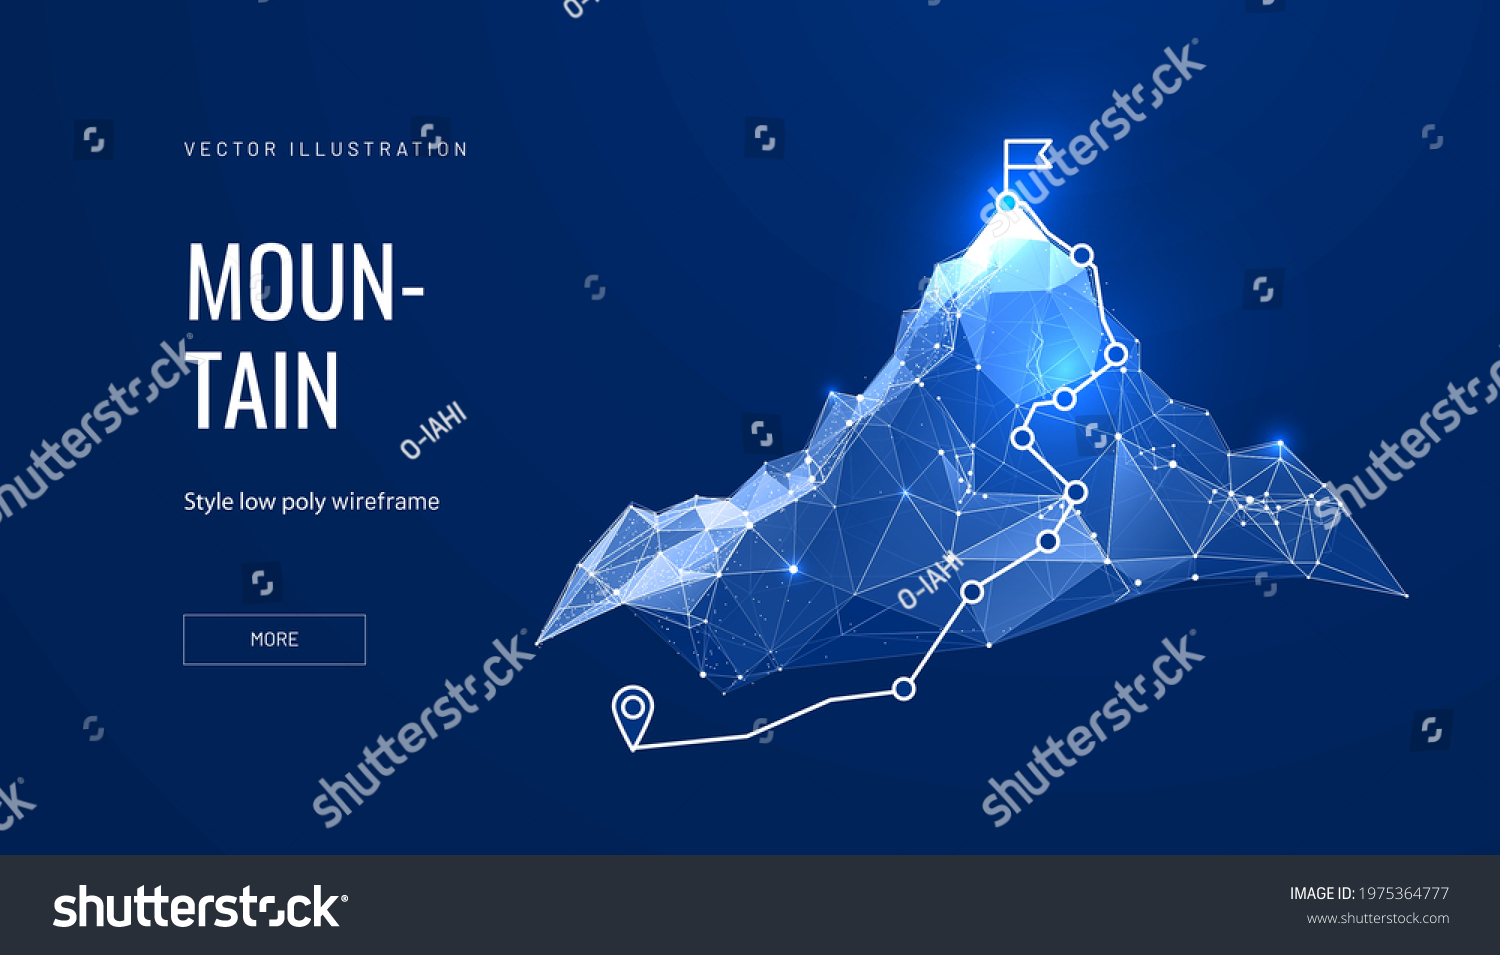 SVG of Mountain with a path to the top in digital futuristic style on a blue background. Vector illustration of success achievement concept. svg